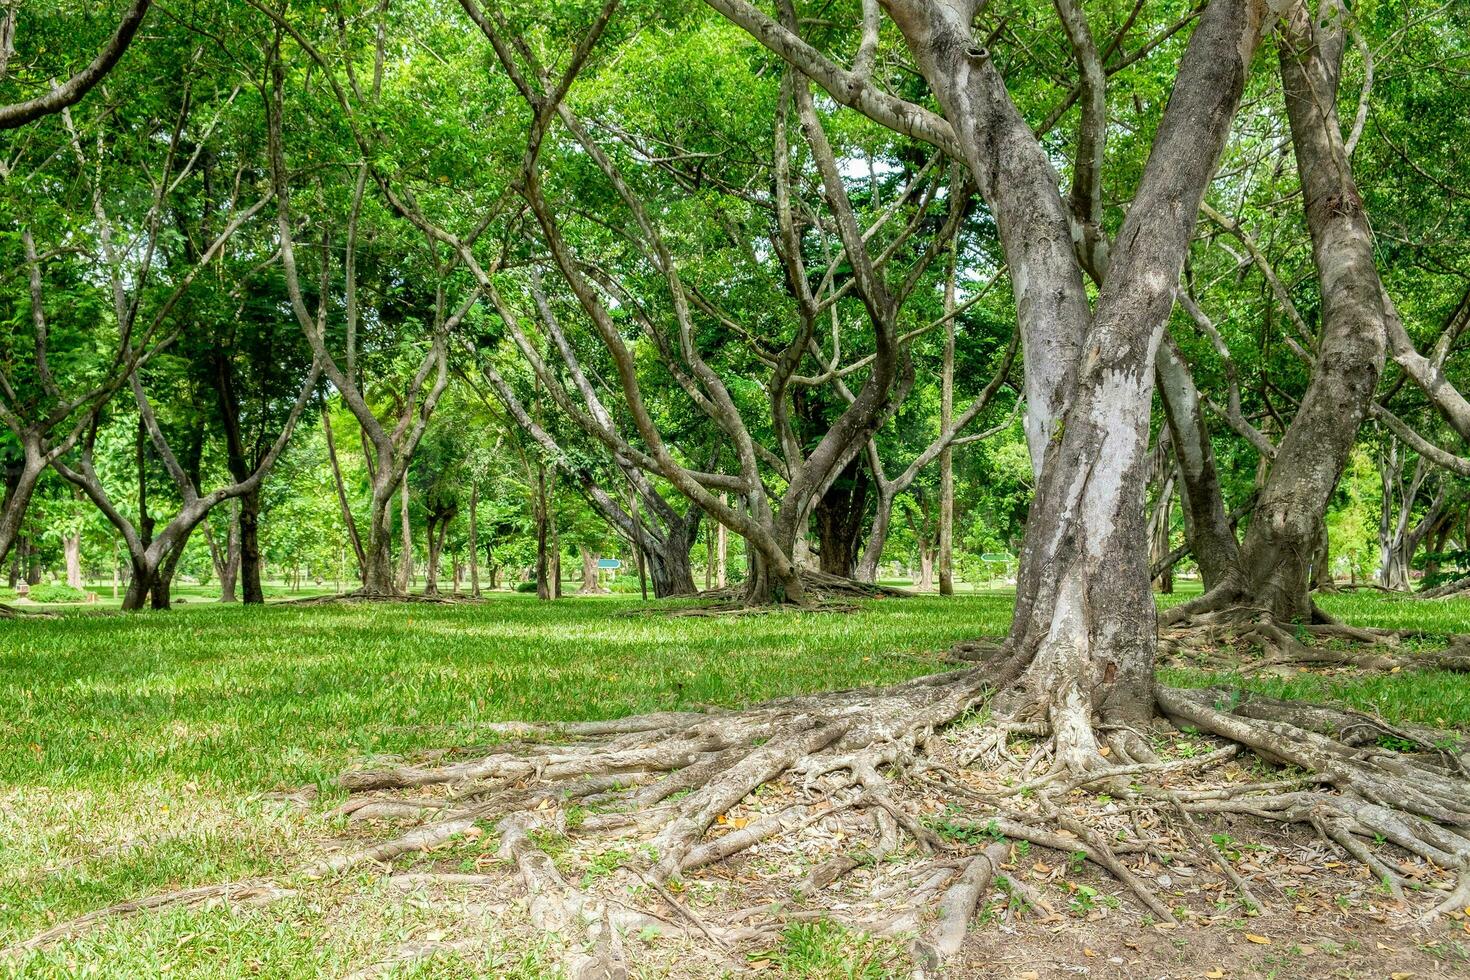 Mangrove root forest shady photo